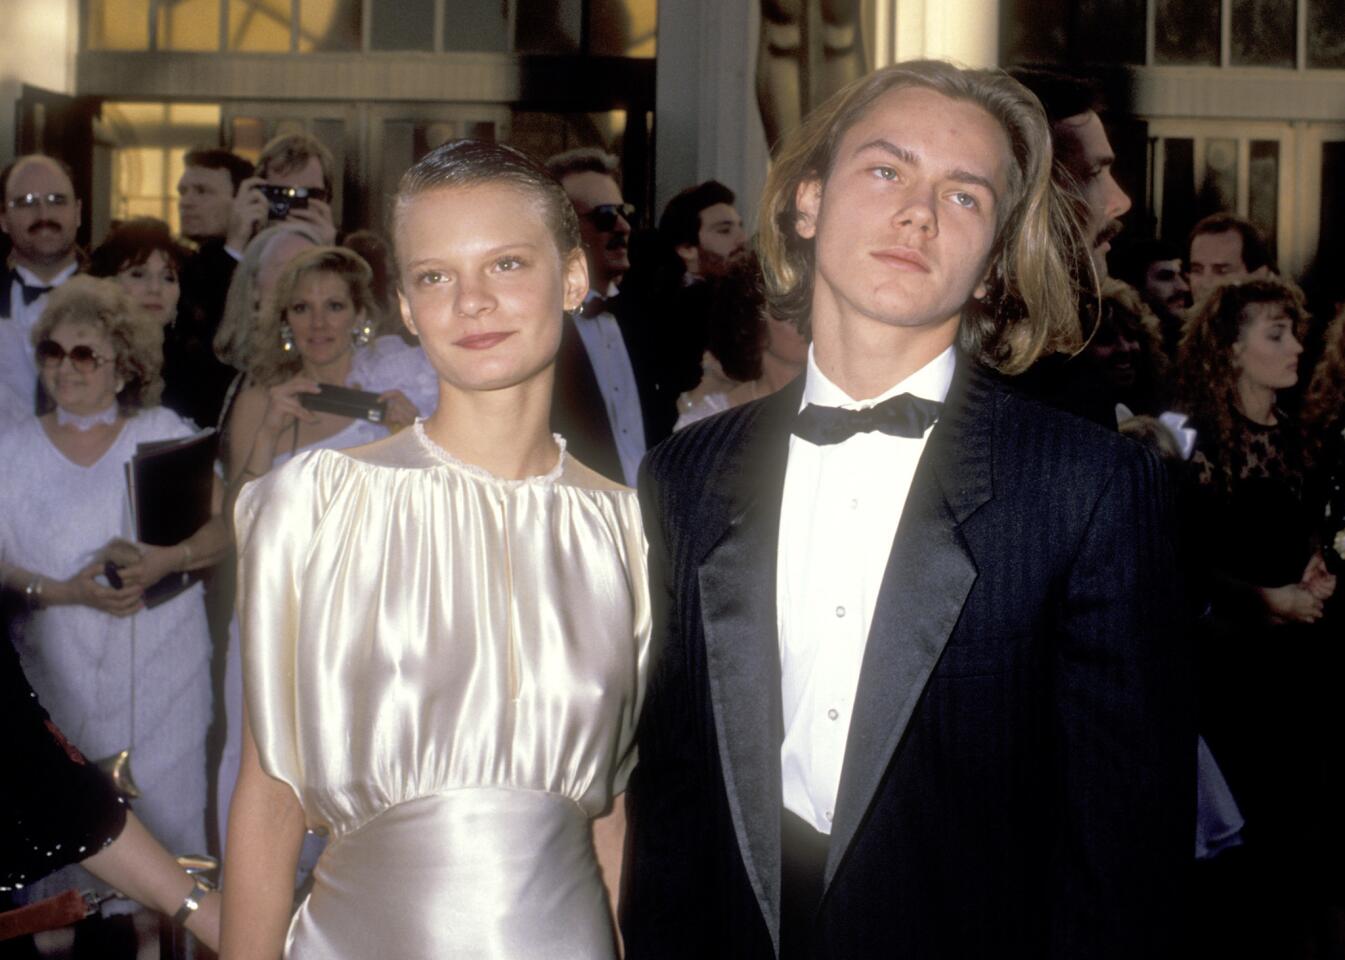 Martha Plimpton and River Phoenix at the 1989 Academy Awards at the Shrine Auditorium in Los Angeles. They appeared together in the 1986 film "The Mosquito Coast."